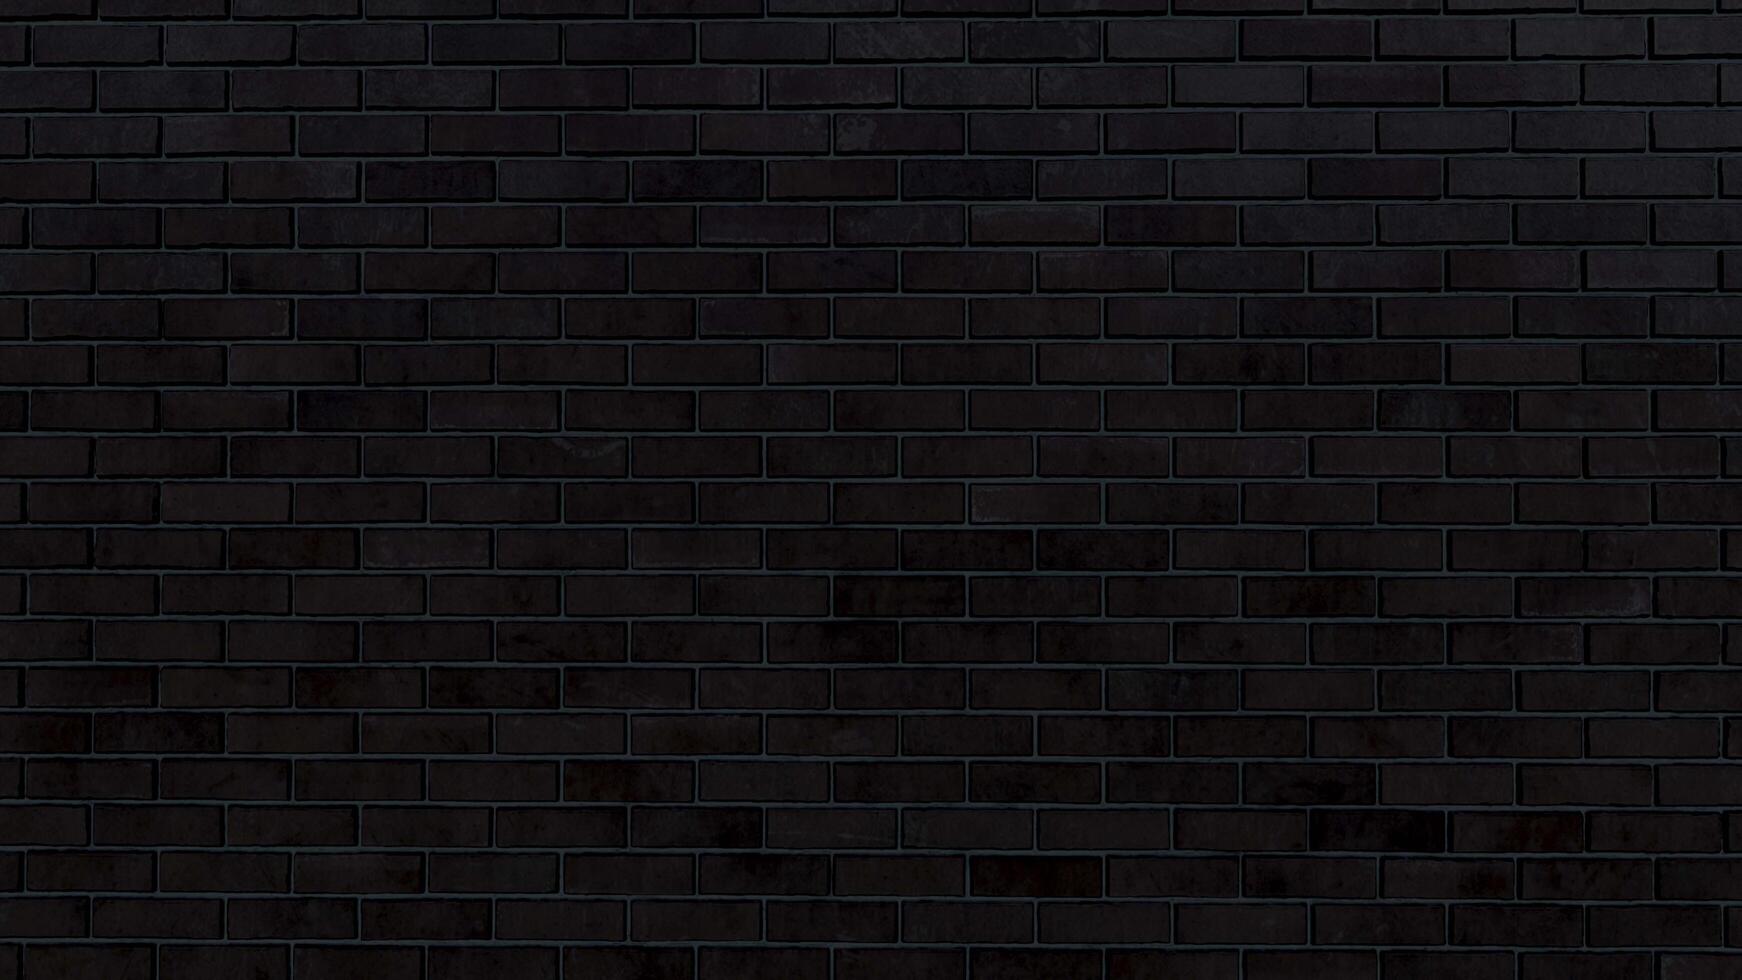 Brick texture brown for interior floor and wall materials photo